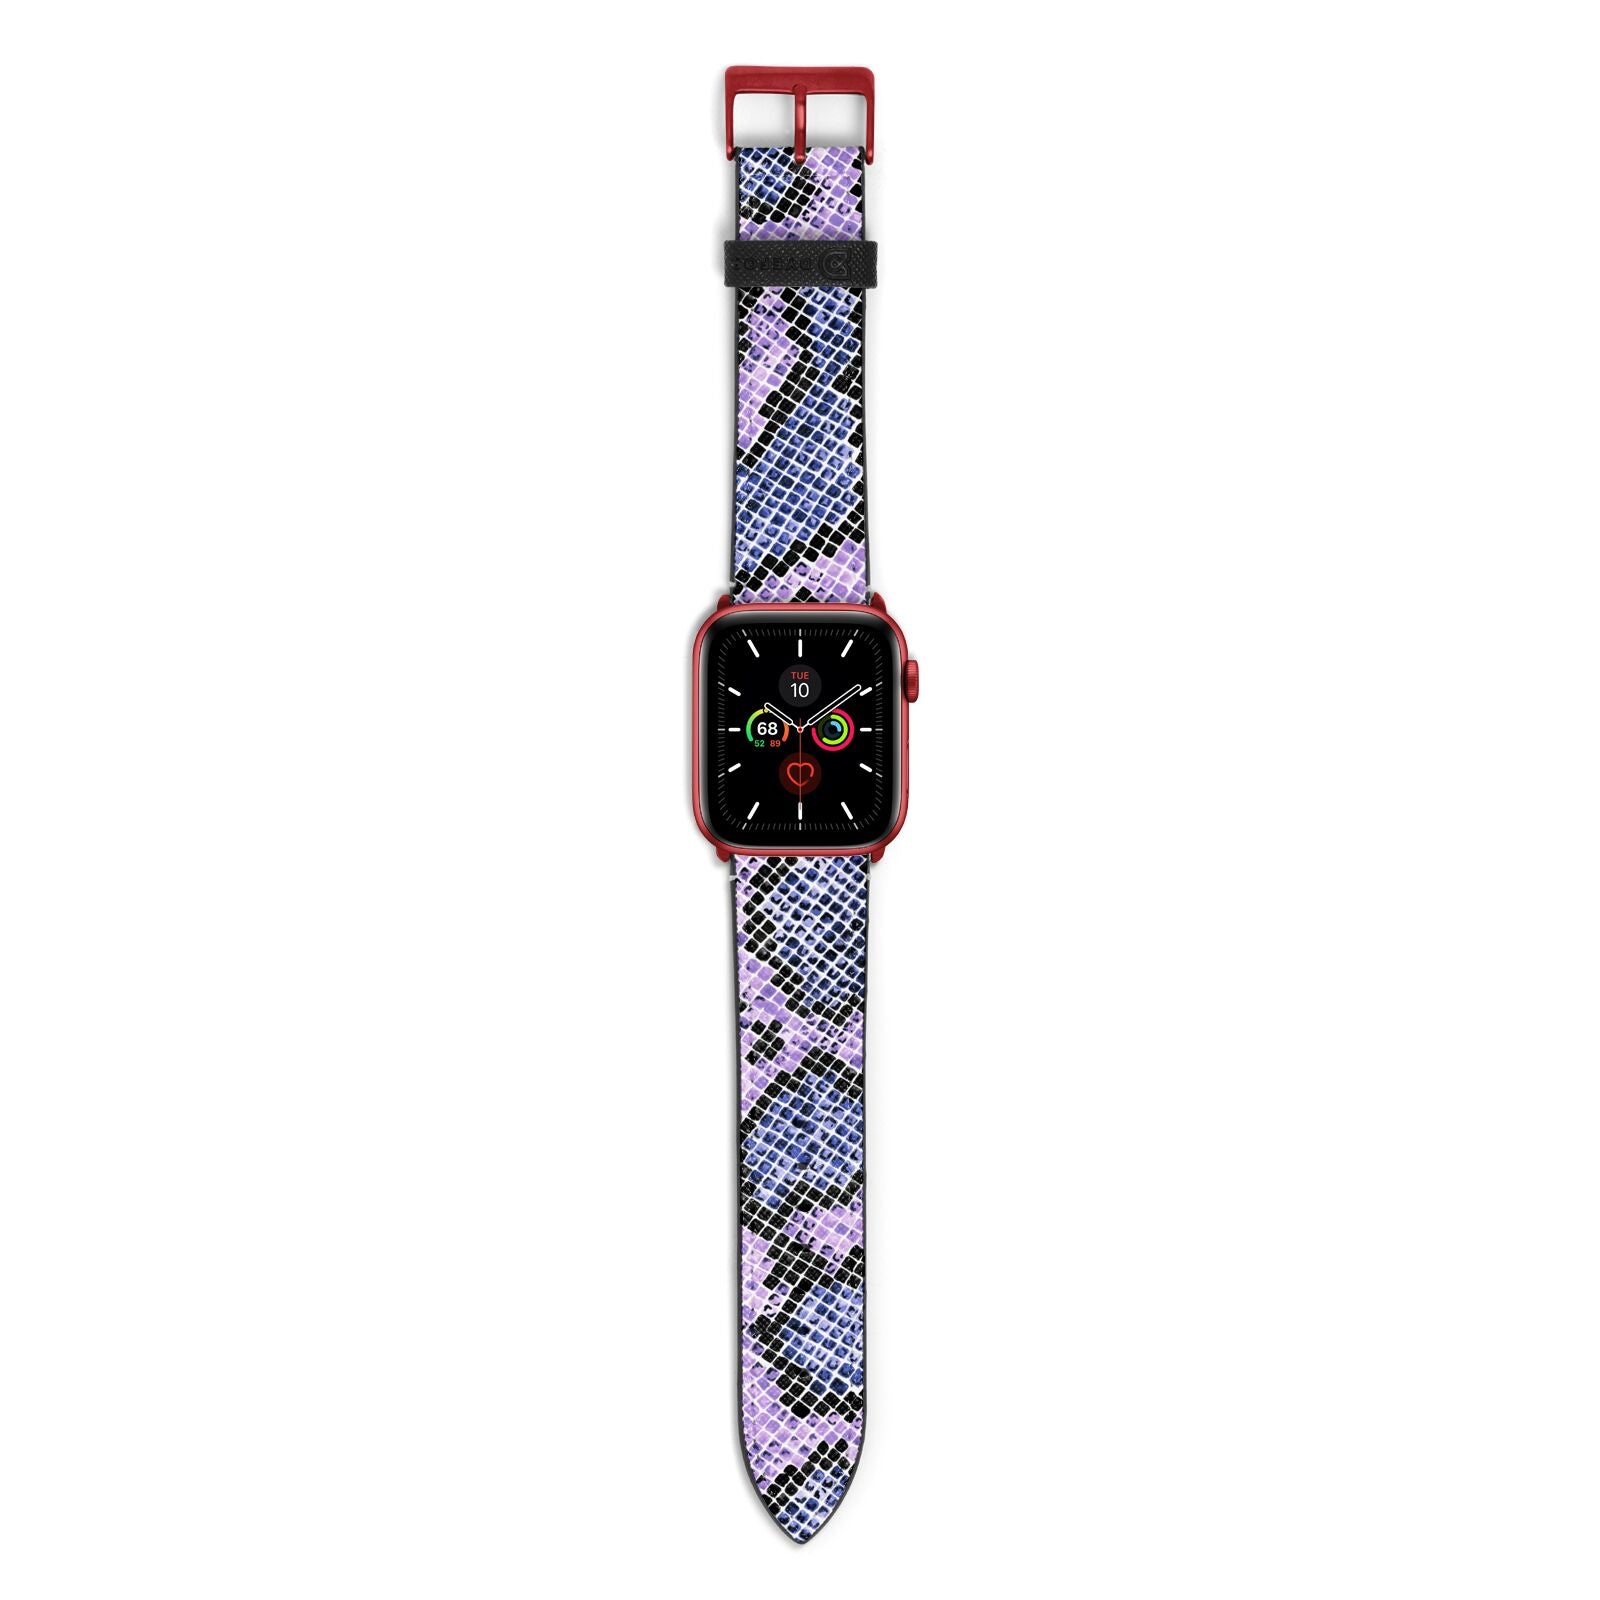 Purple And Blue Snakeskin Apple Watch Strap with Red Hardware